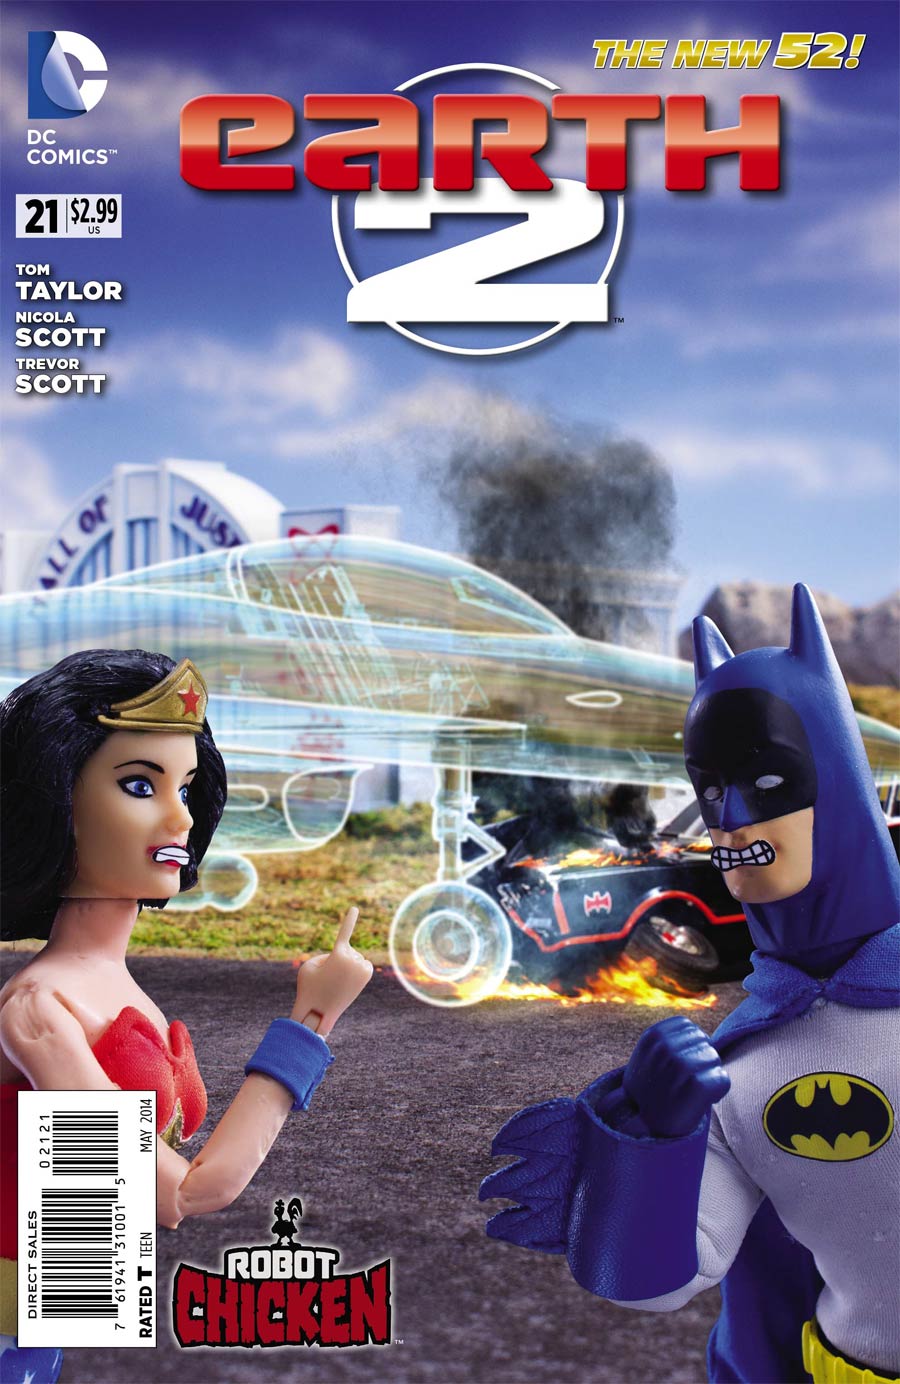 Earth 2 #21 Cover B Incentive Robot Chicken Variant Cover